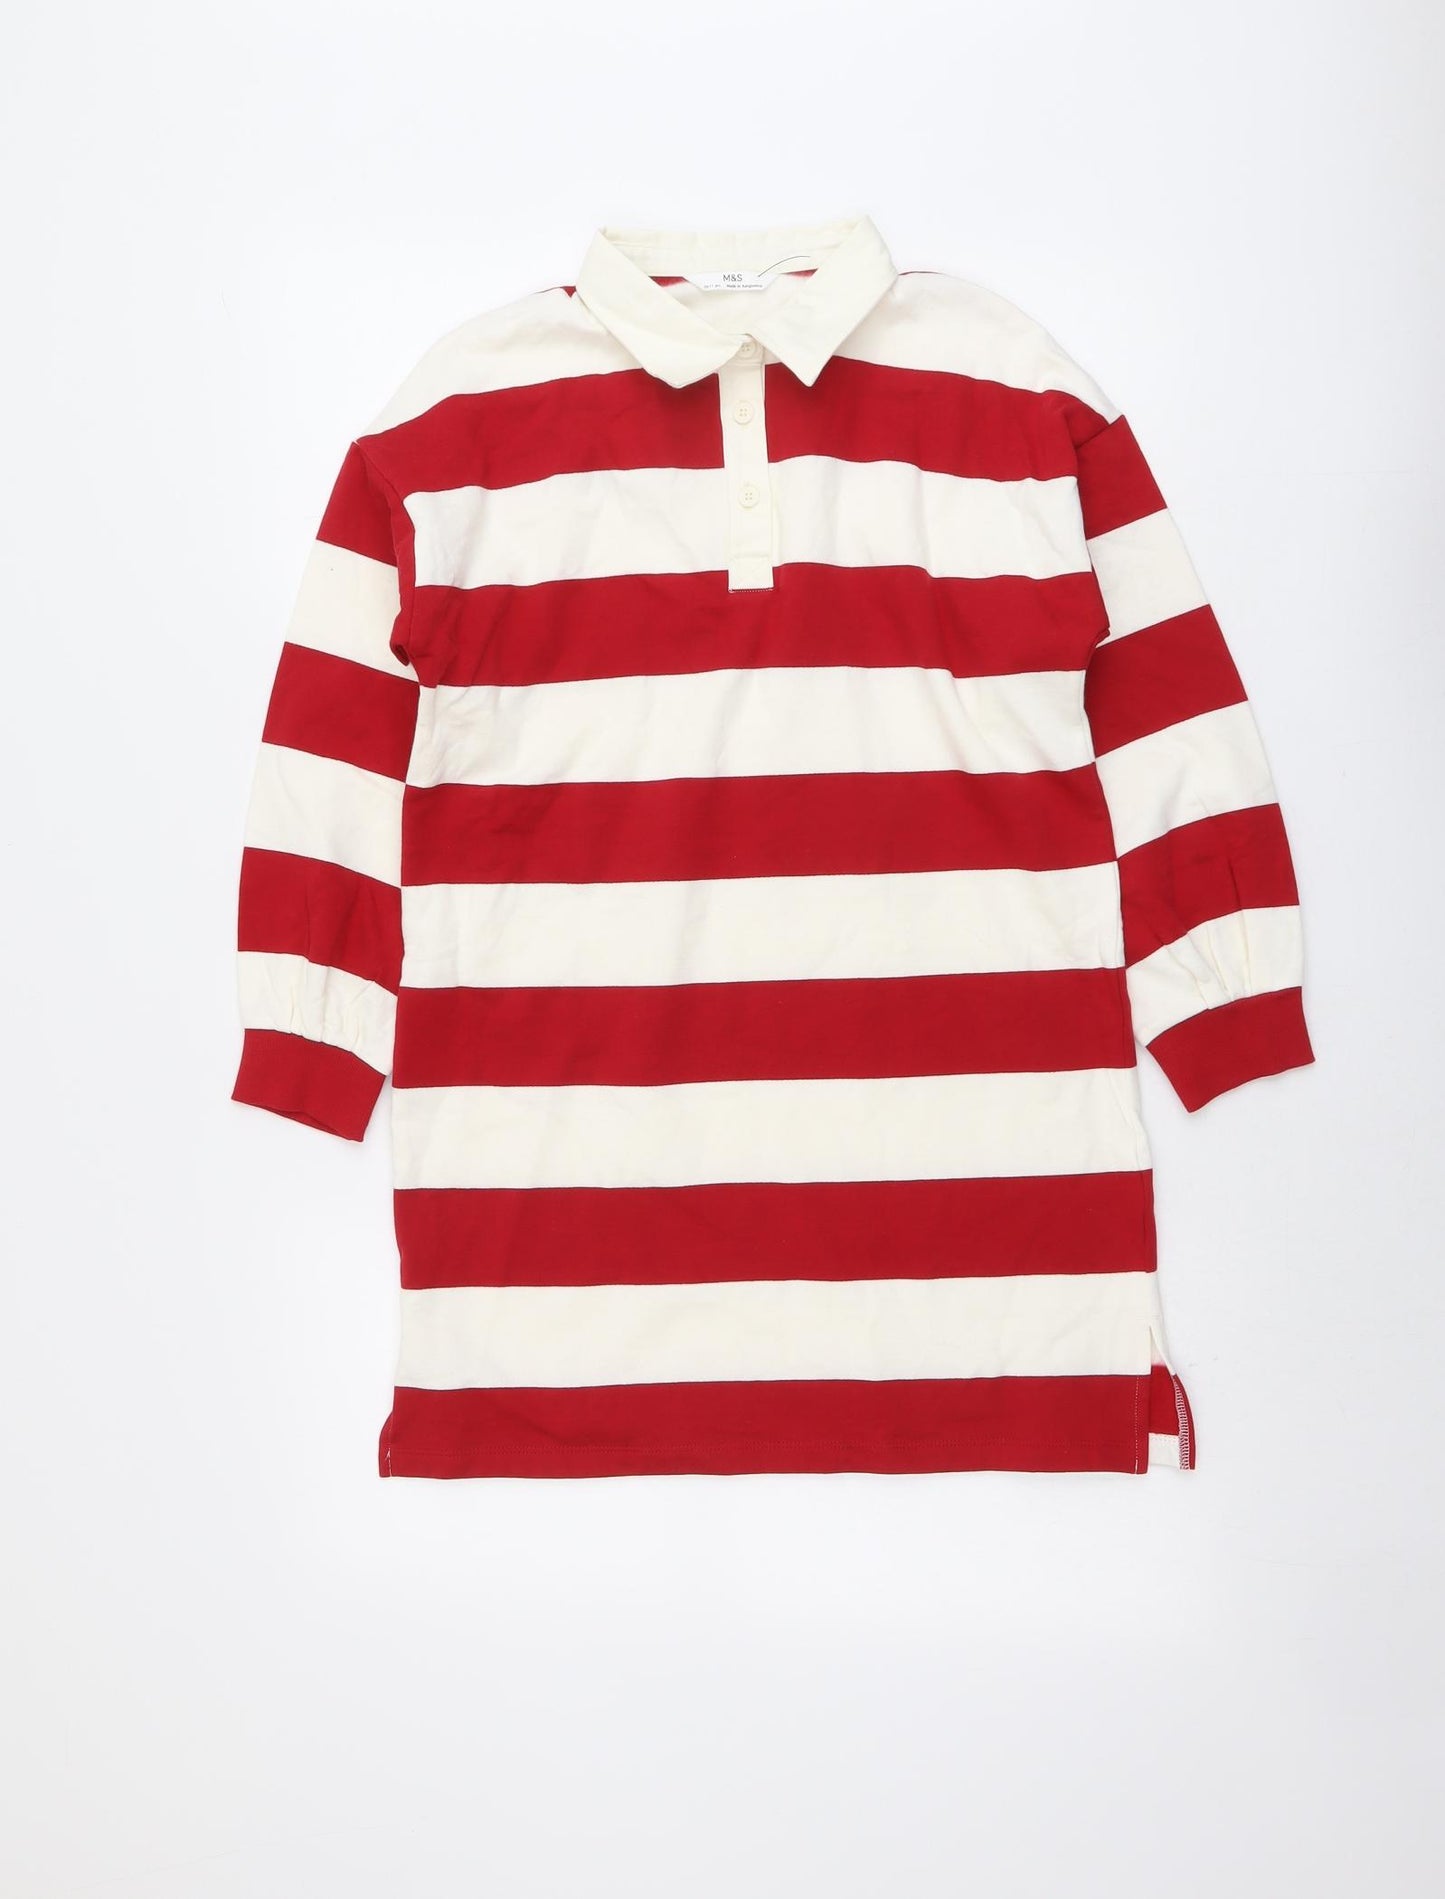 Marks and Spencer Girls Red Striped Cotton Pullover Sweatshirt Size 10-11 Years Button